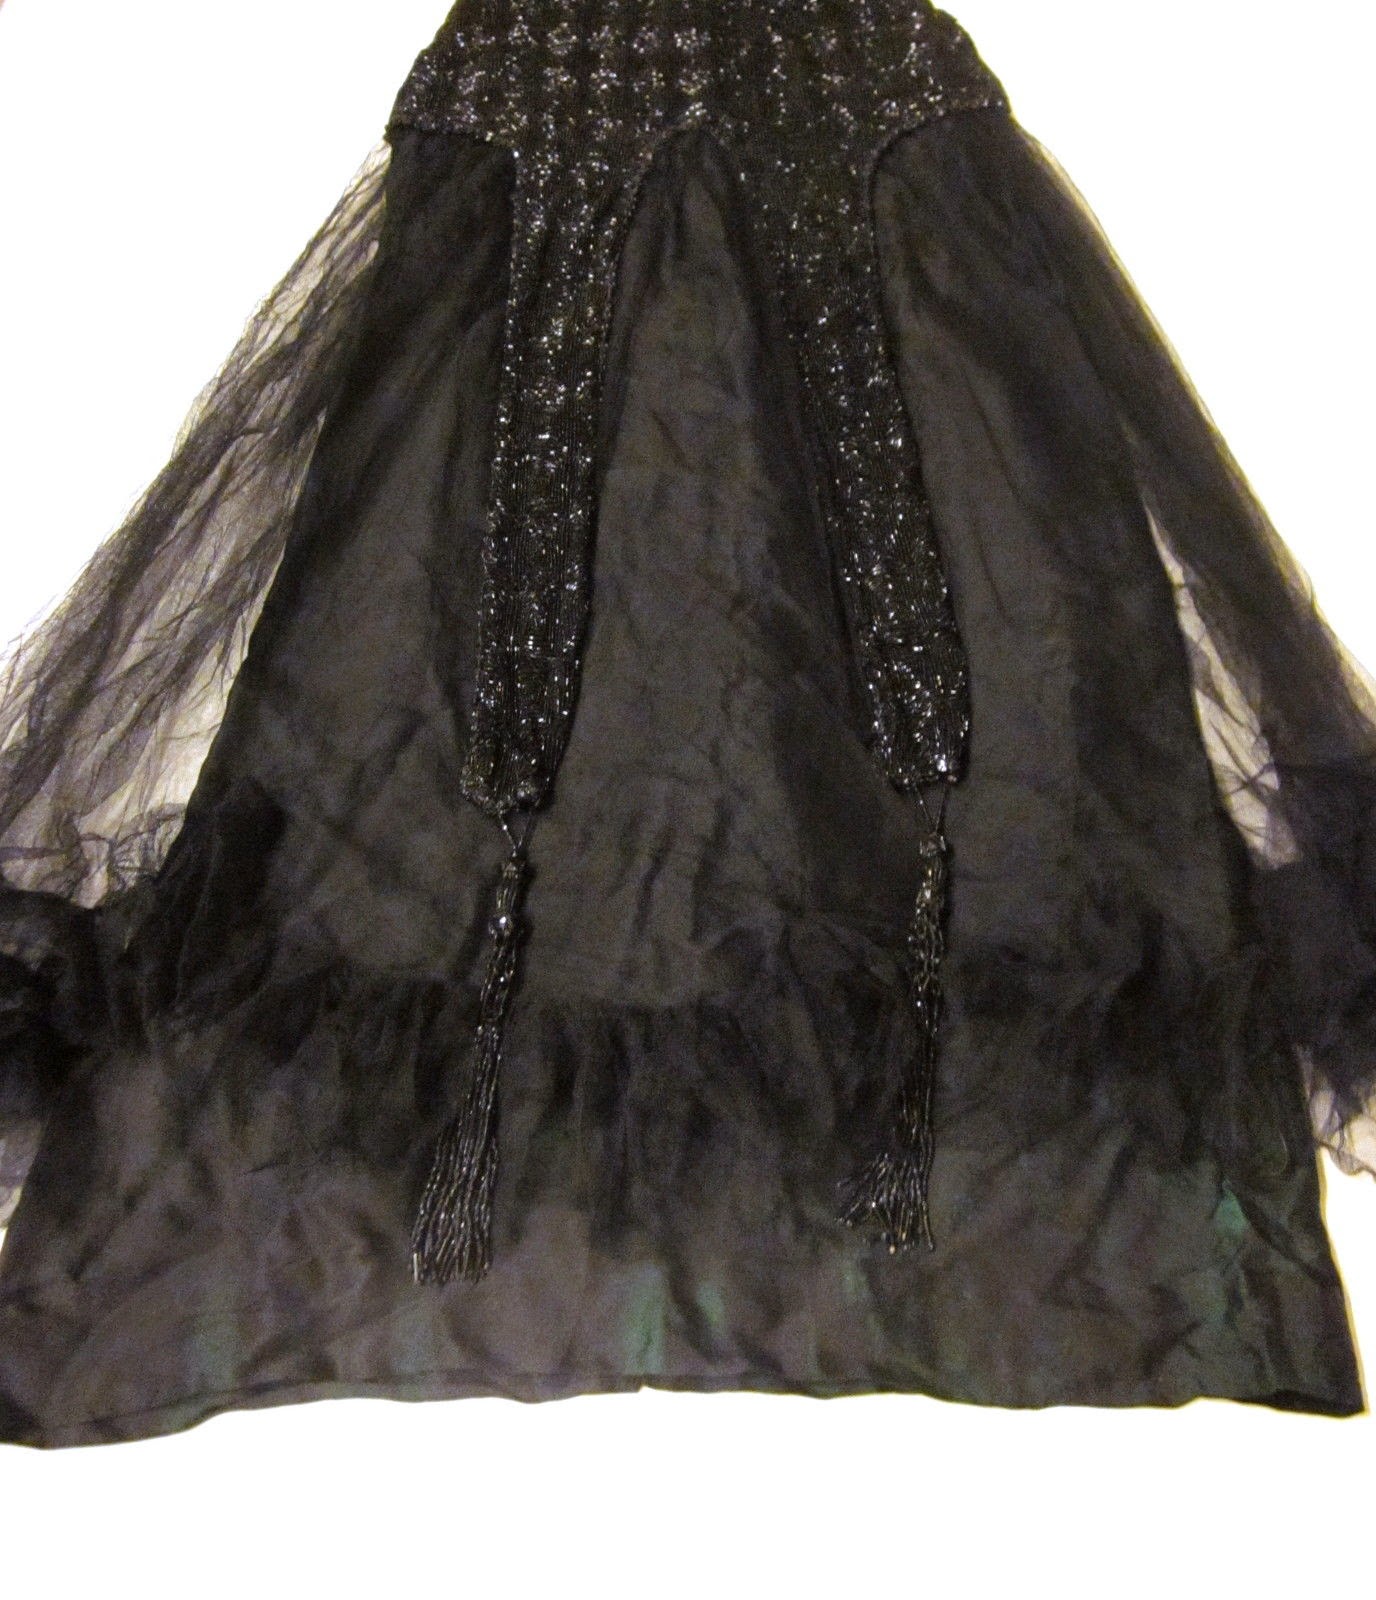 All The Pretty Dresses: Late 1920's/early 1930's Evening Dress